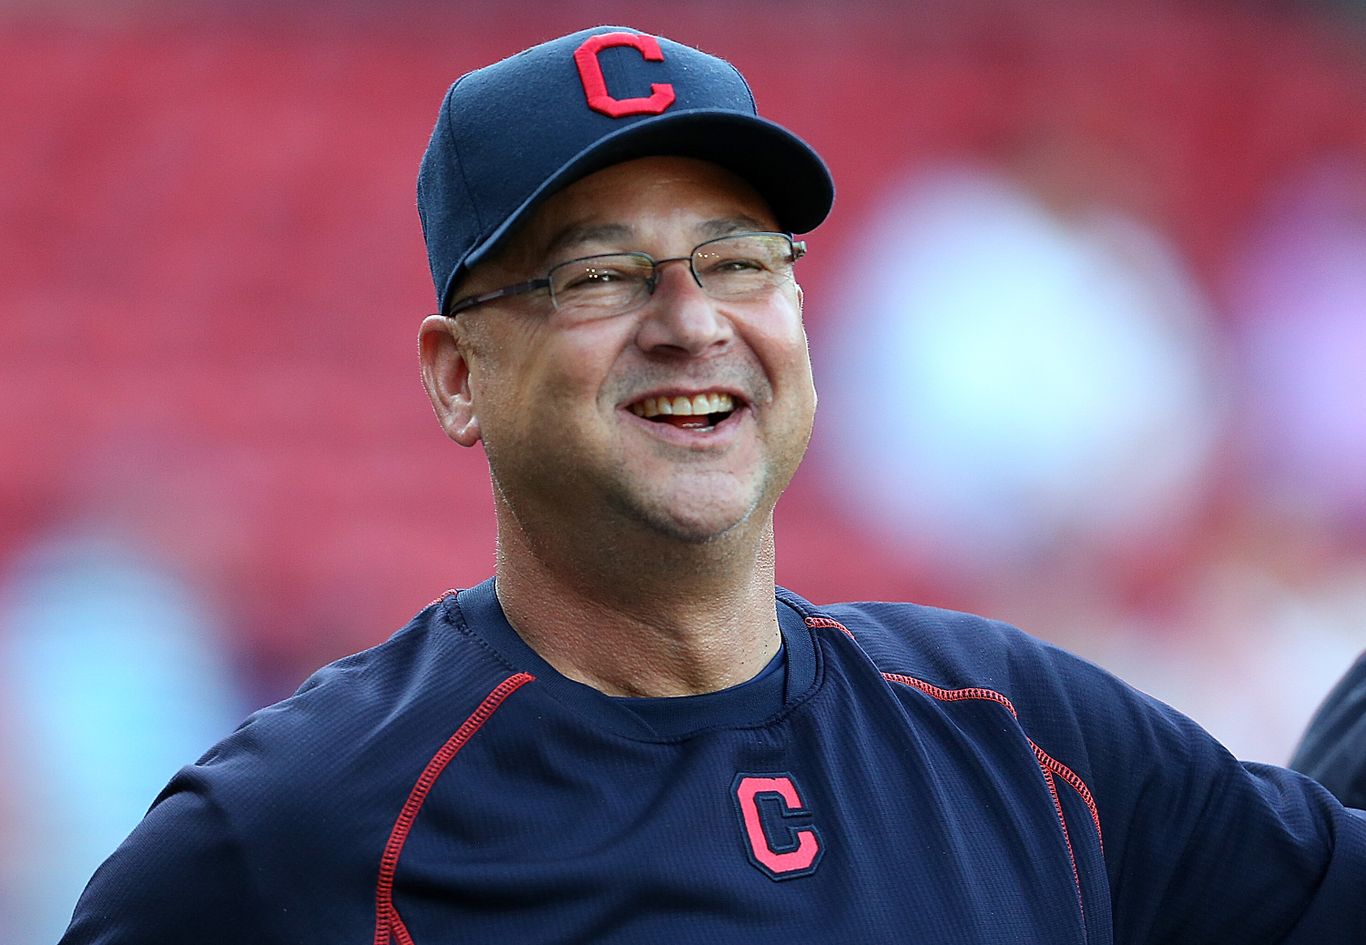 Terry Francona Returns for 2022 Cleveland Guardians - The New York Times